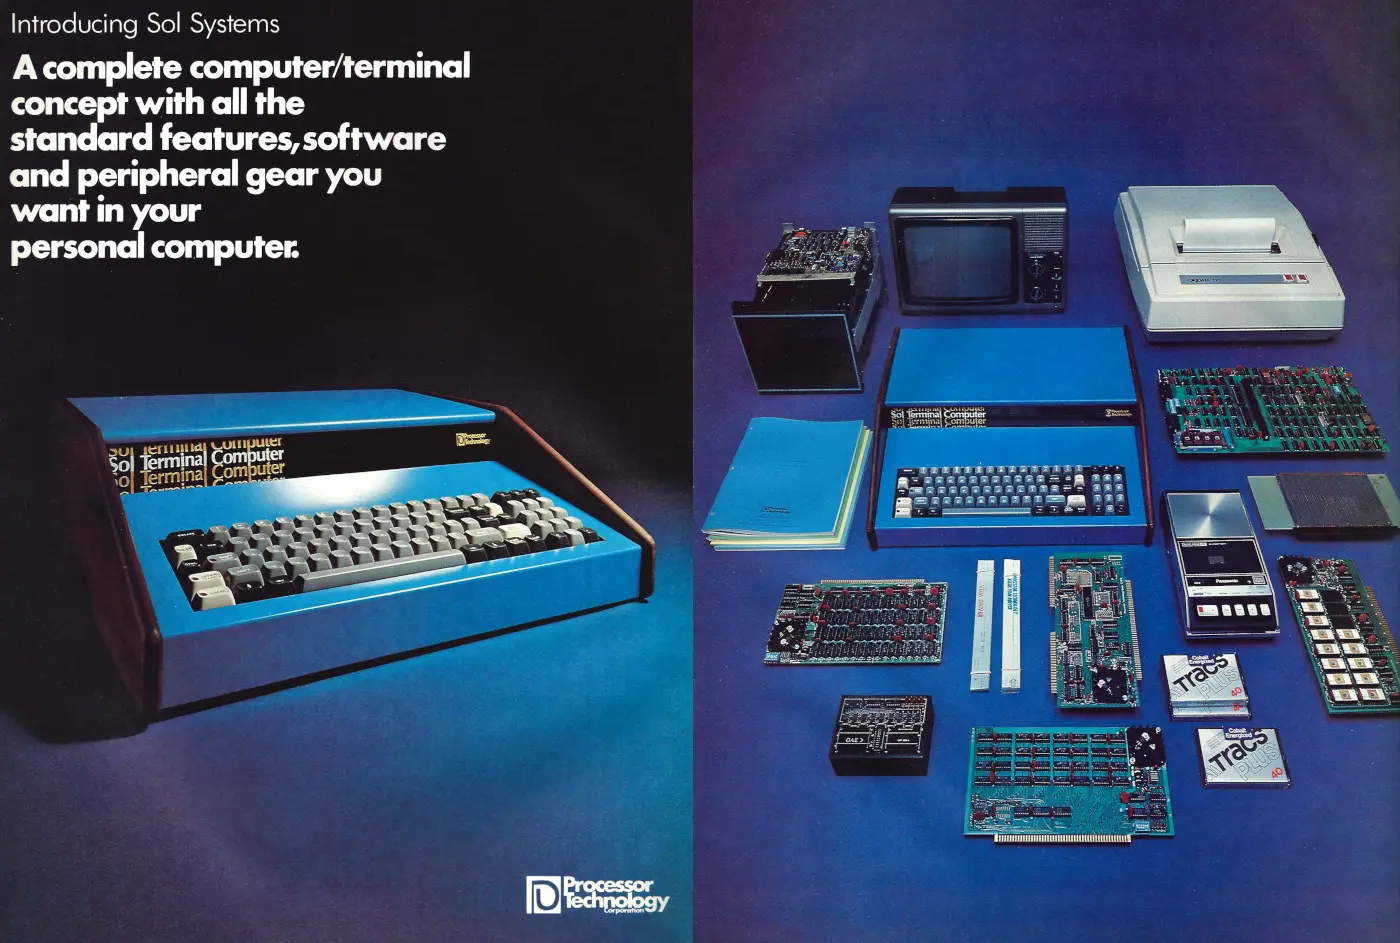 Processor Technology Advert: <b>Introducing Sol Systems - A complete computer/terminal concept</b>, from Byte - The Small Systems Journal, January 1977